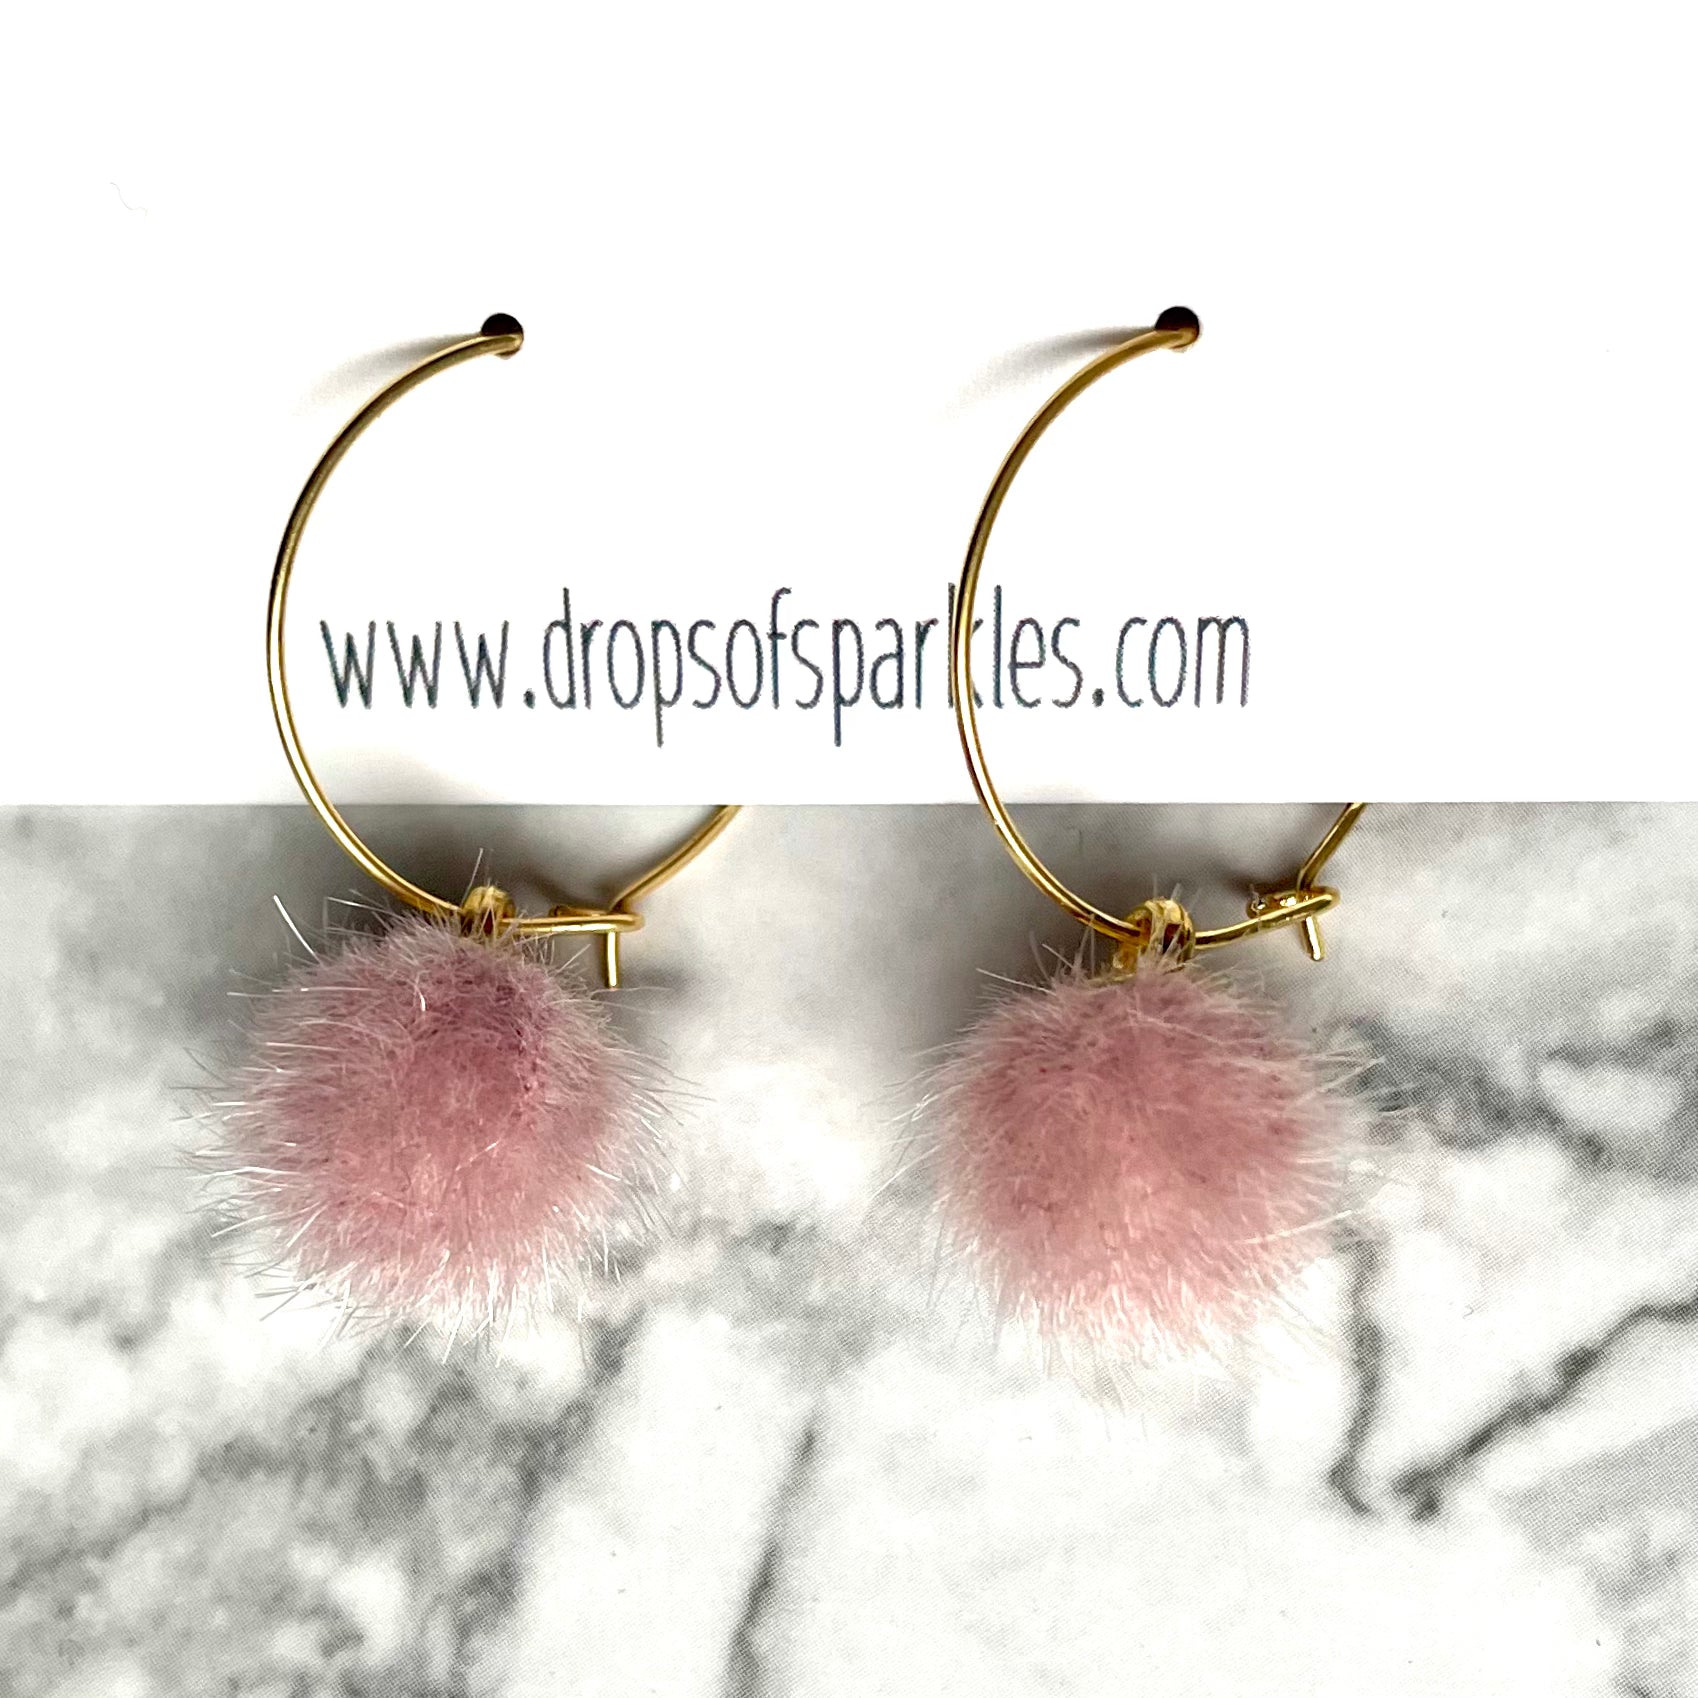 20mm round 24k shiny gold plated  "hoops" with fun little pastel petal pink fuzzy pom poms attached